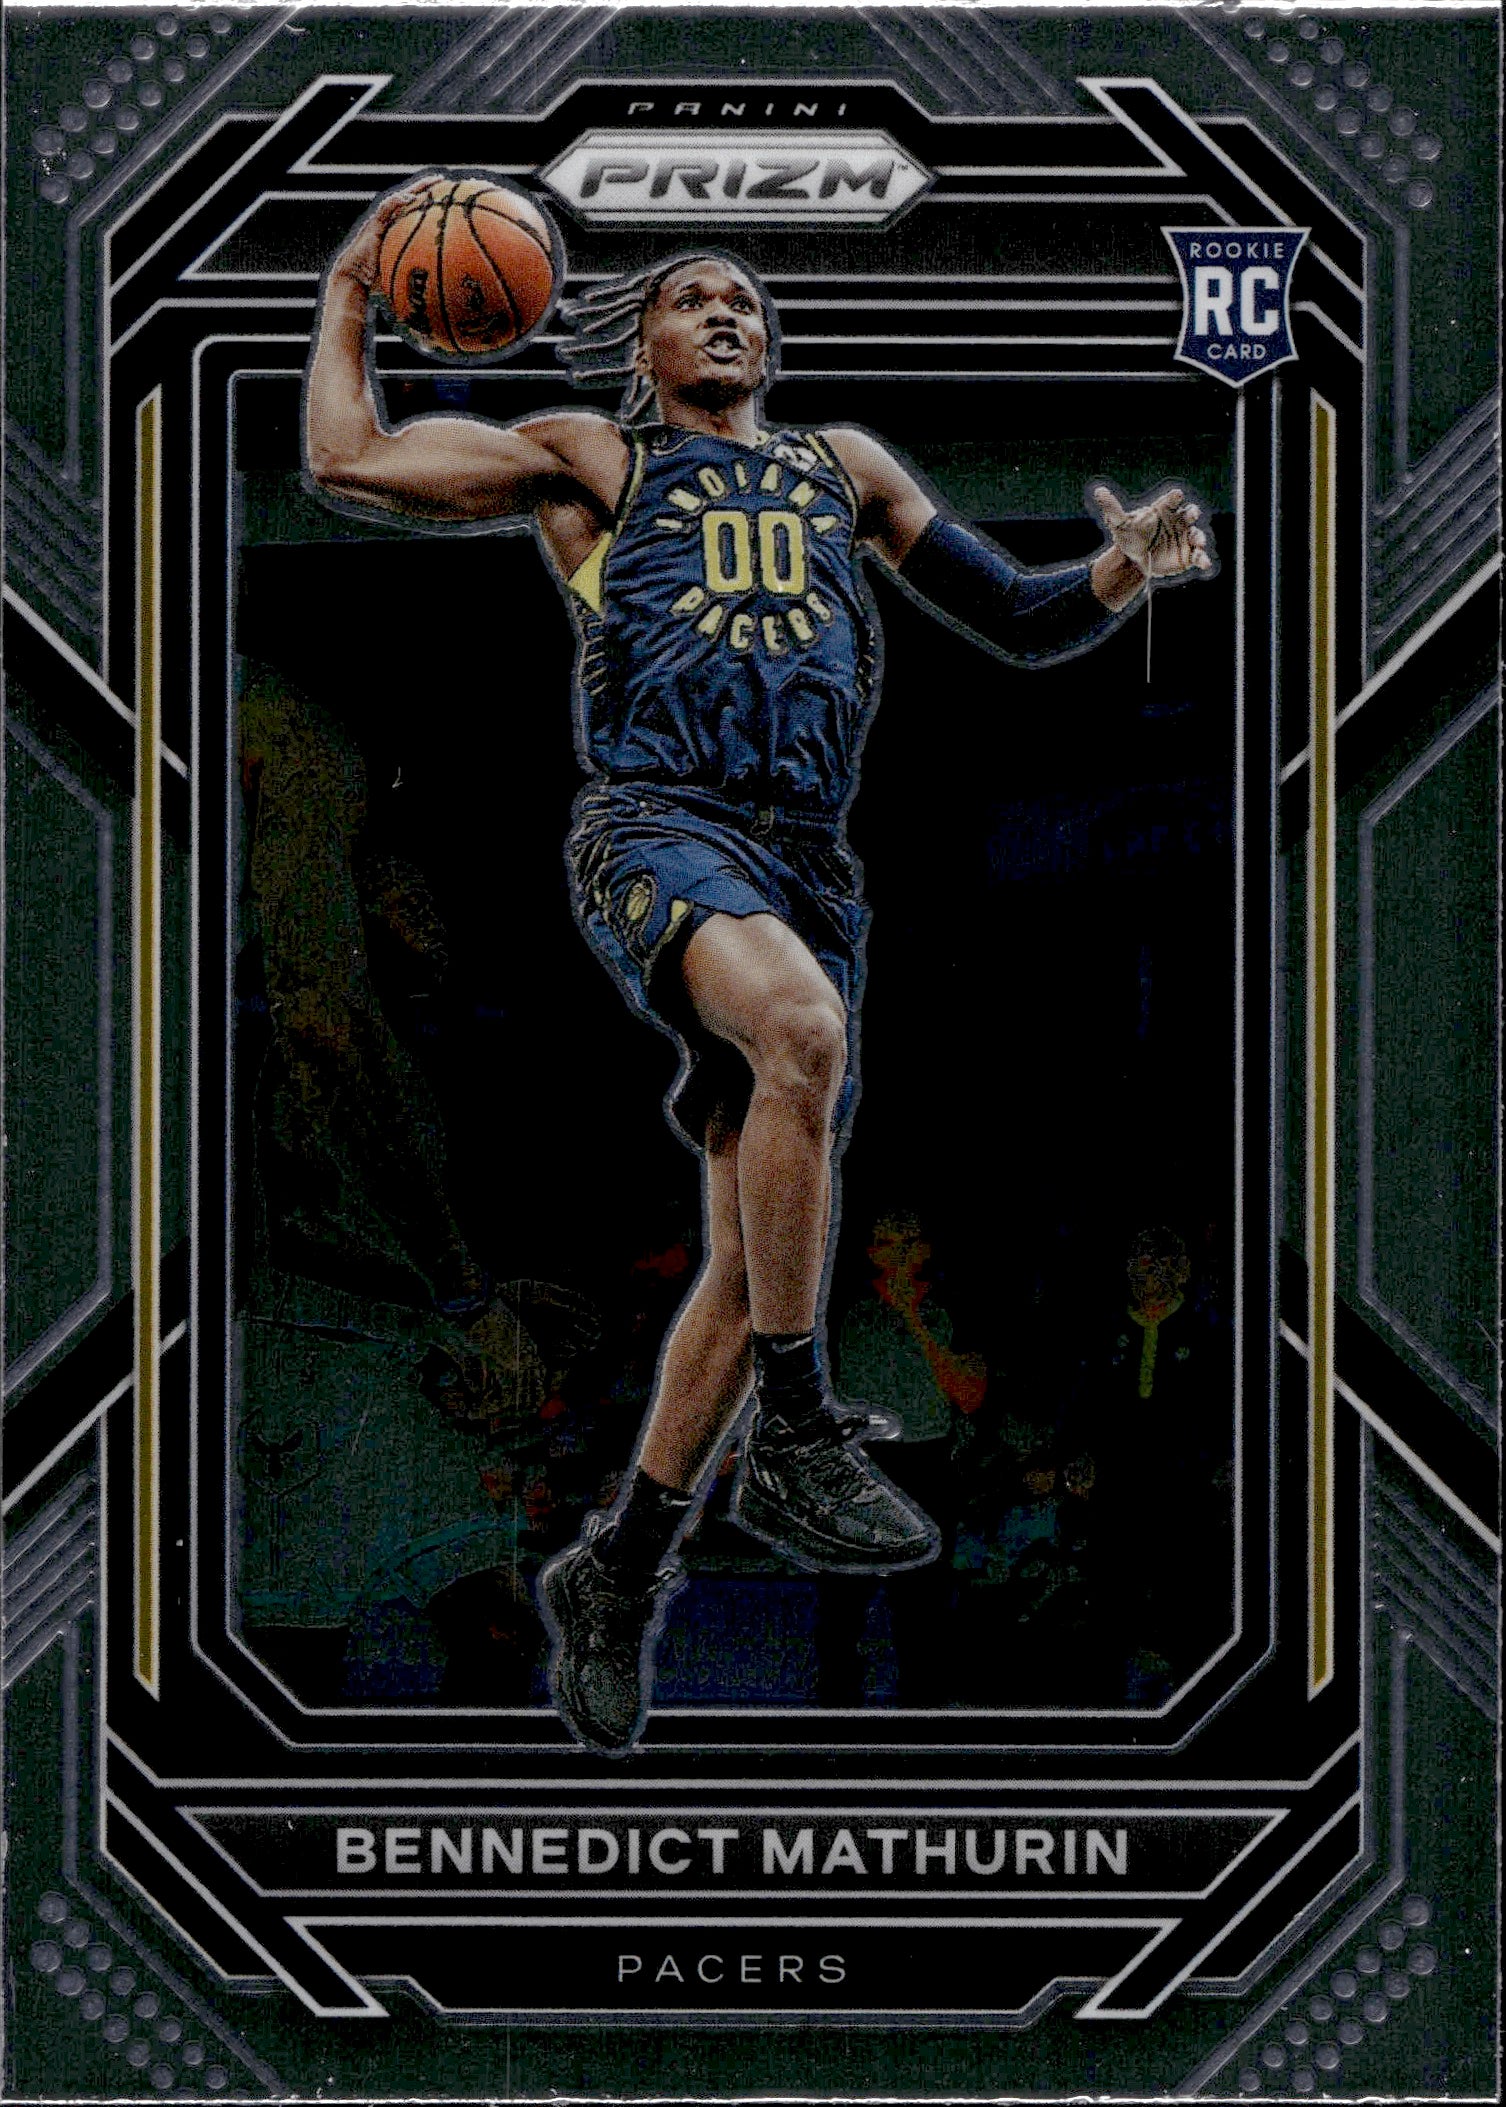 2022-23 Bennedict Mathurin Panini Prizm ROOKIE RC #254 Indiana Pacers 1